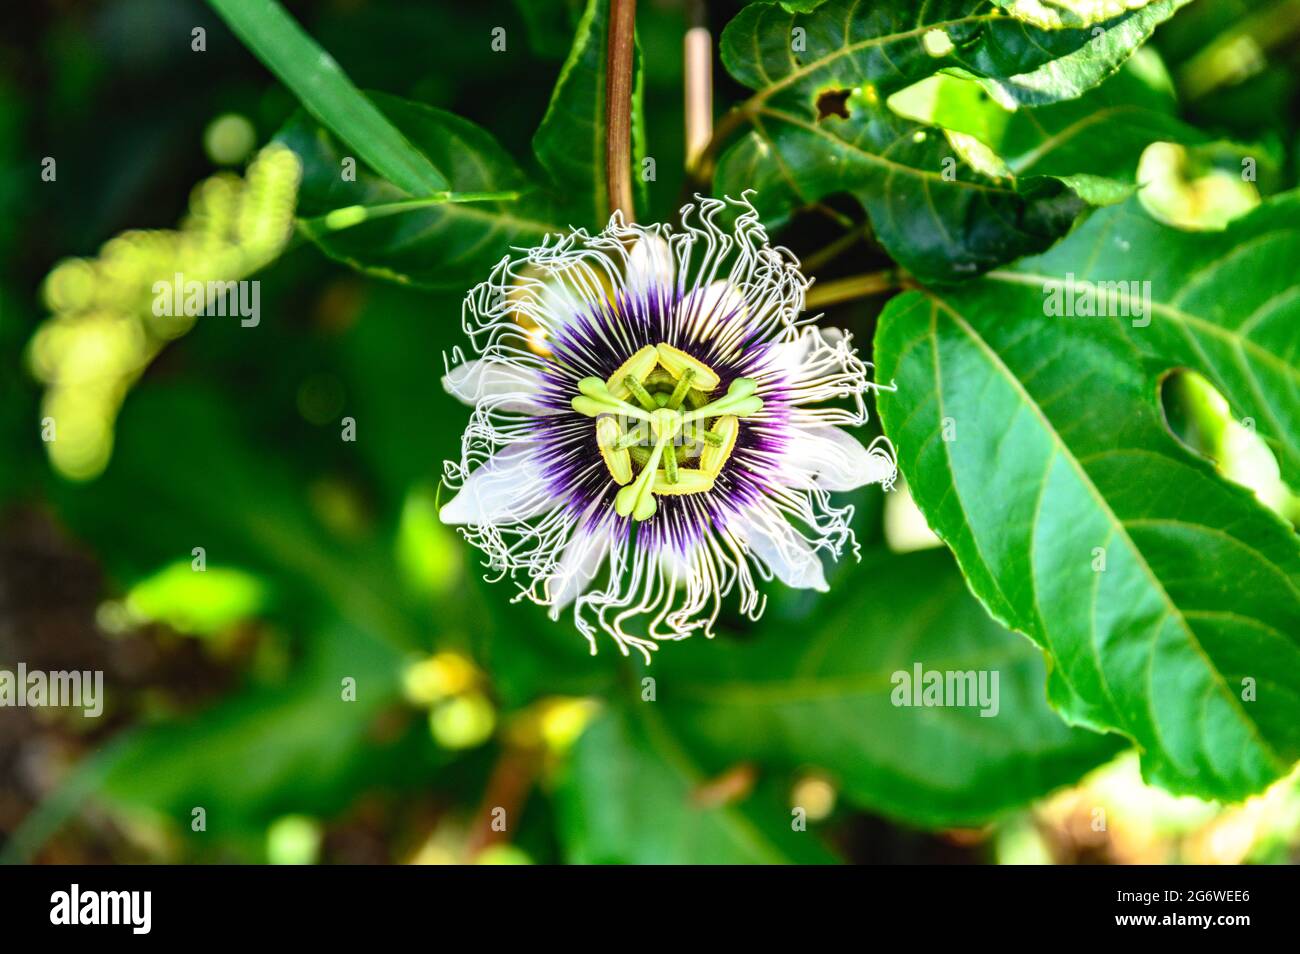 Close up of a Maracuya flower with the leaves and the garden in blurred background. Stock Photo